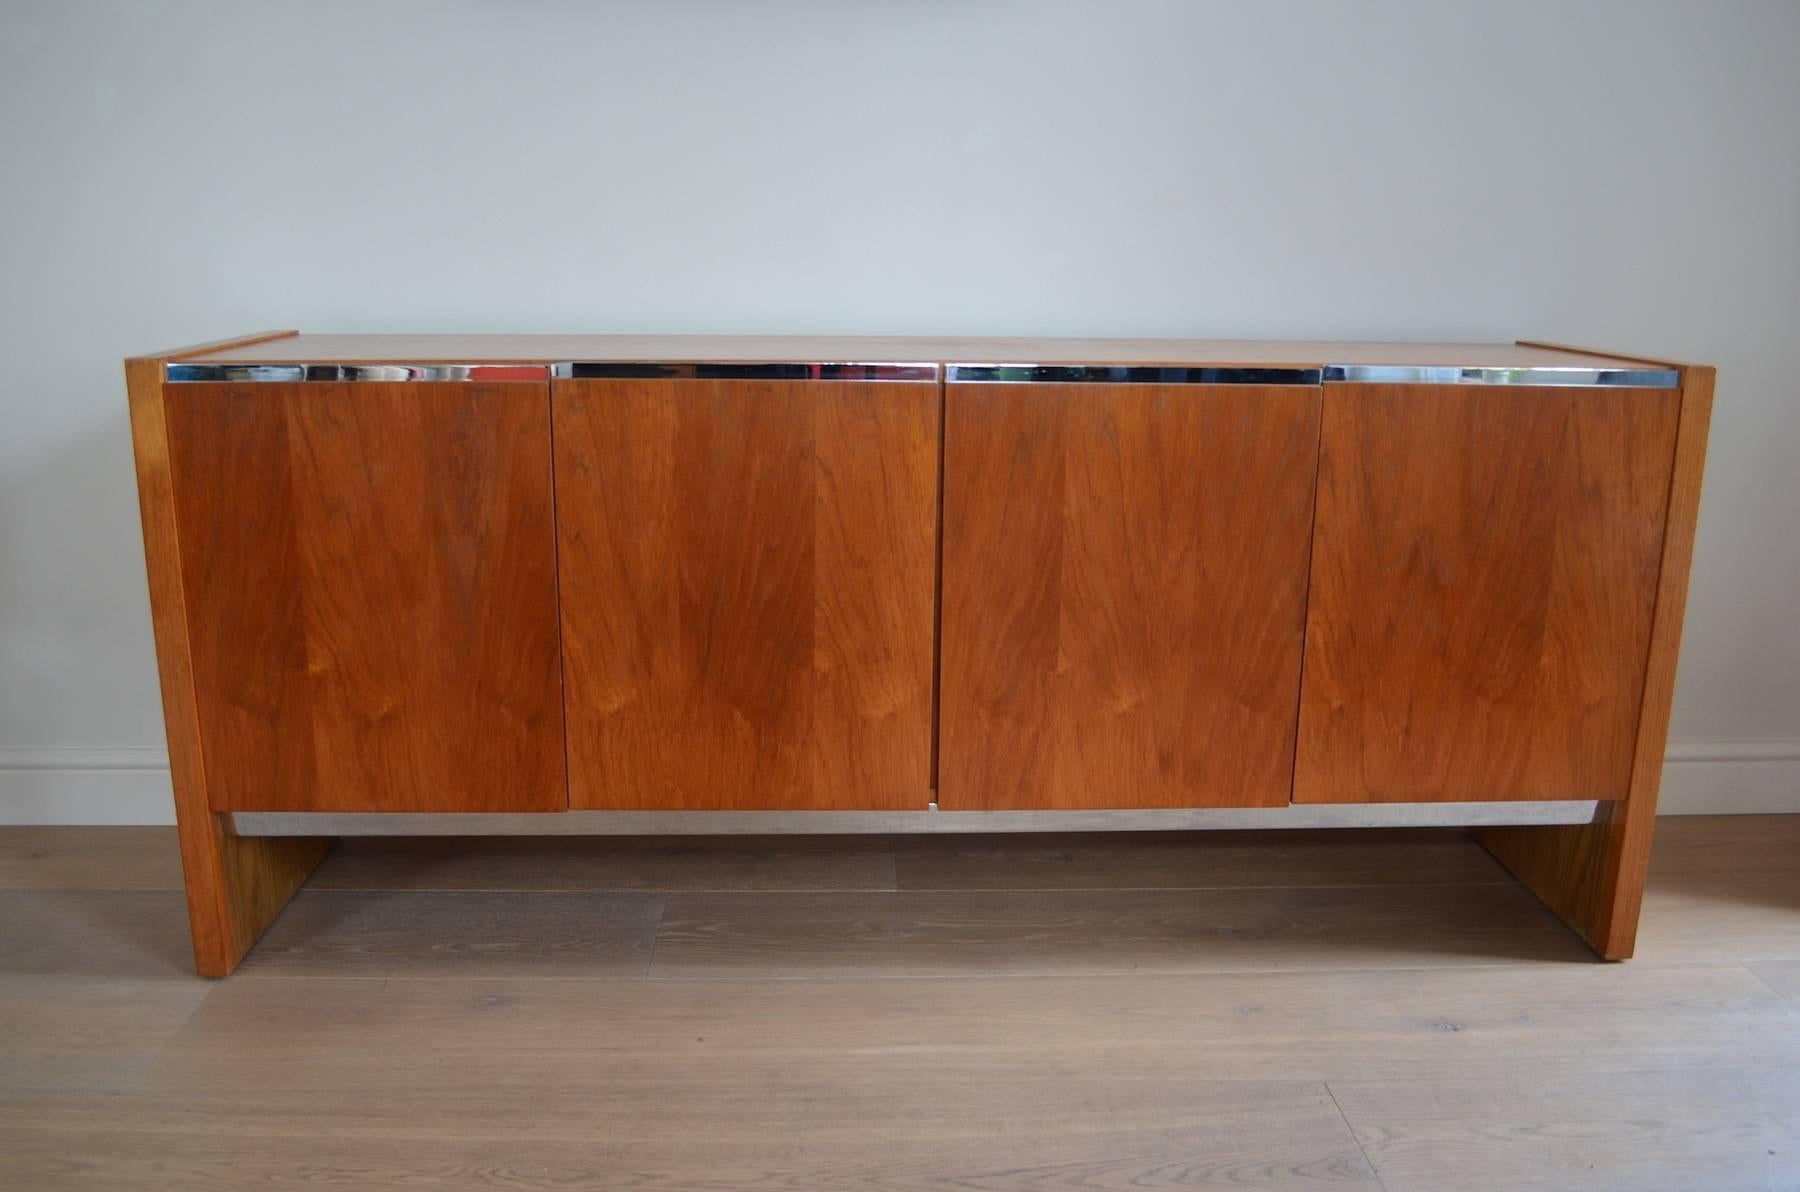 A rare and high quality 1970s Merrow Associates sideboard attributed to the well known design by Richard Young, England. 

Teak wood with chrome-plated steel trim. Good internal storage with drawers and glass shelving.
 